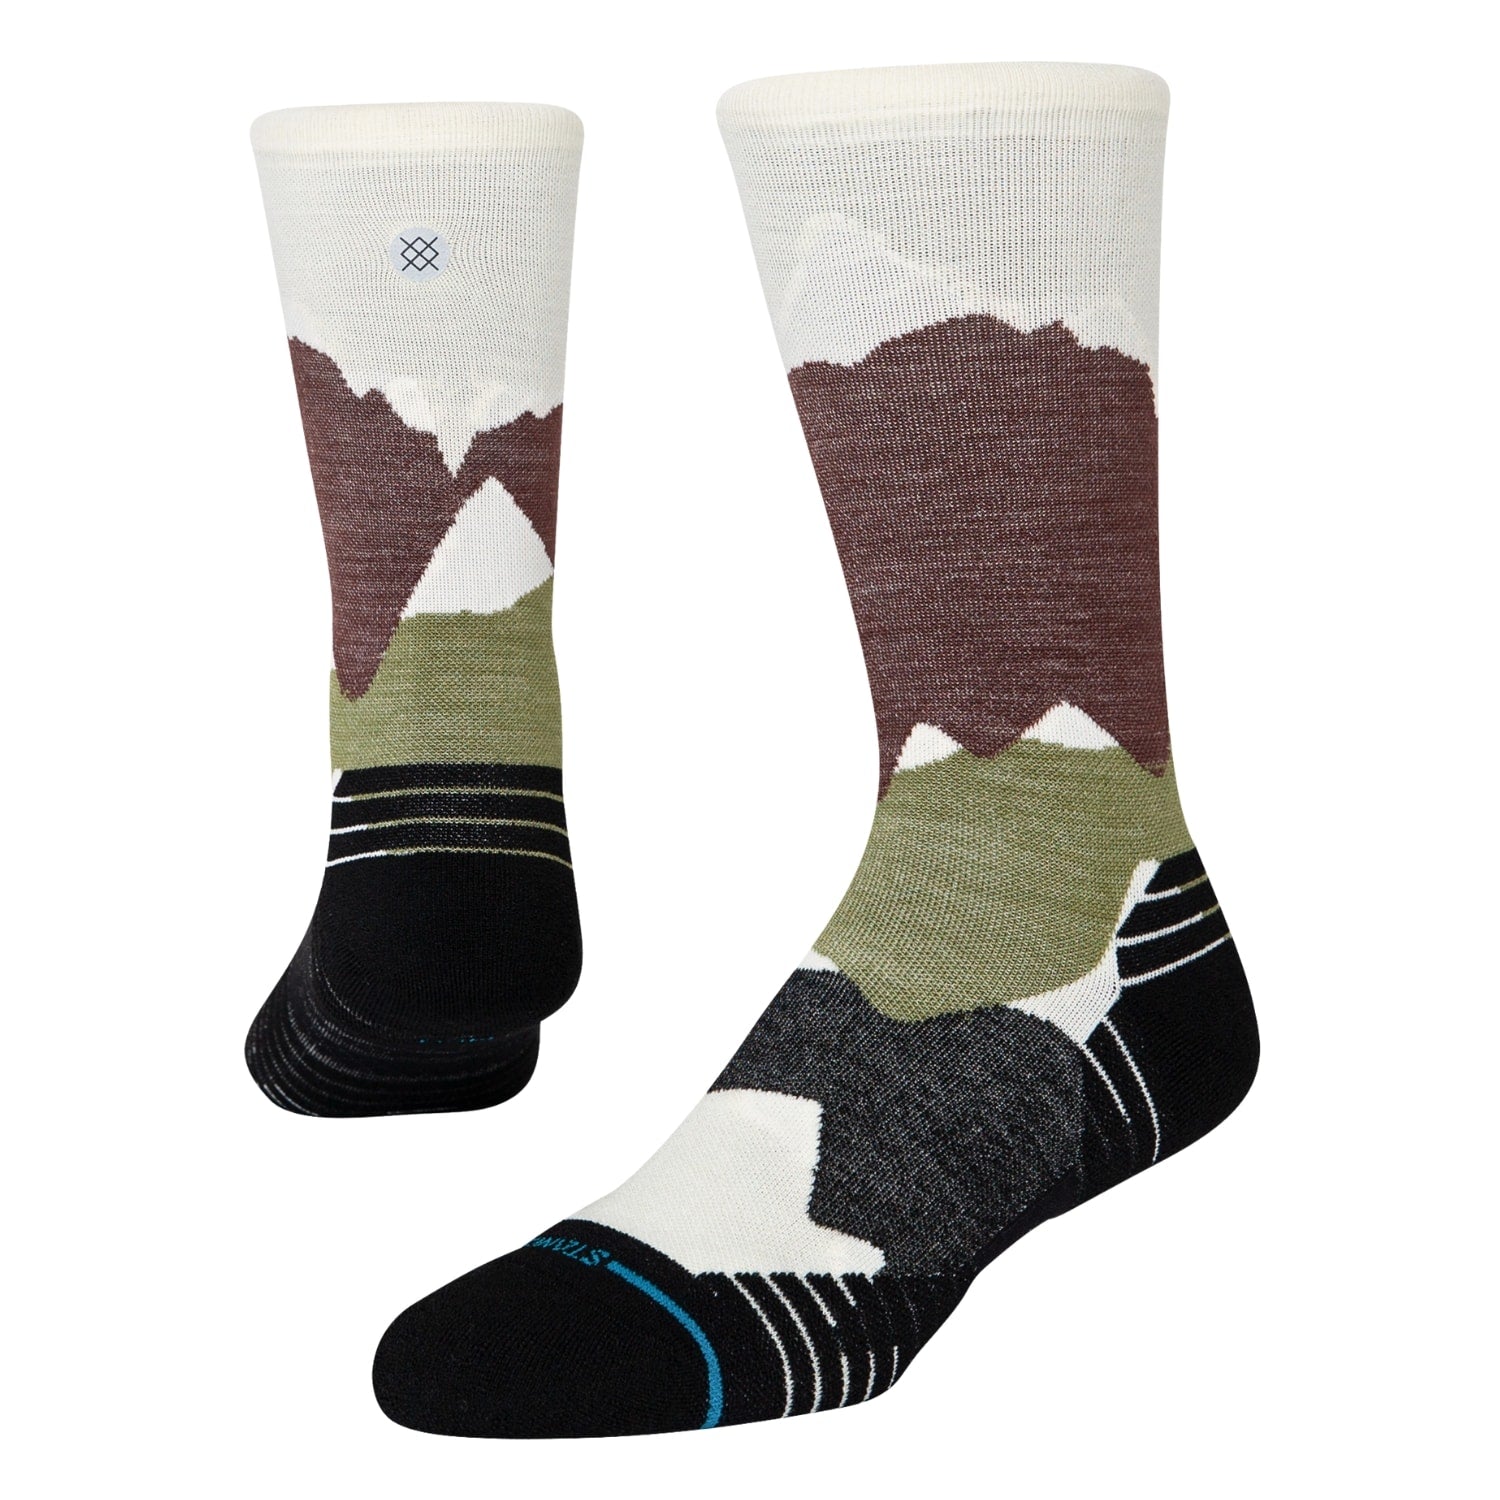 Stance Elevation Crew Sock - Brown - Unisex Crew Length Socks by Stance